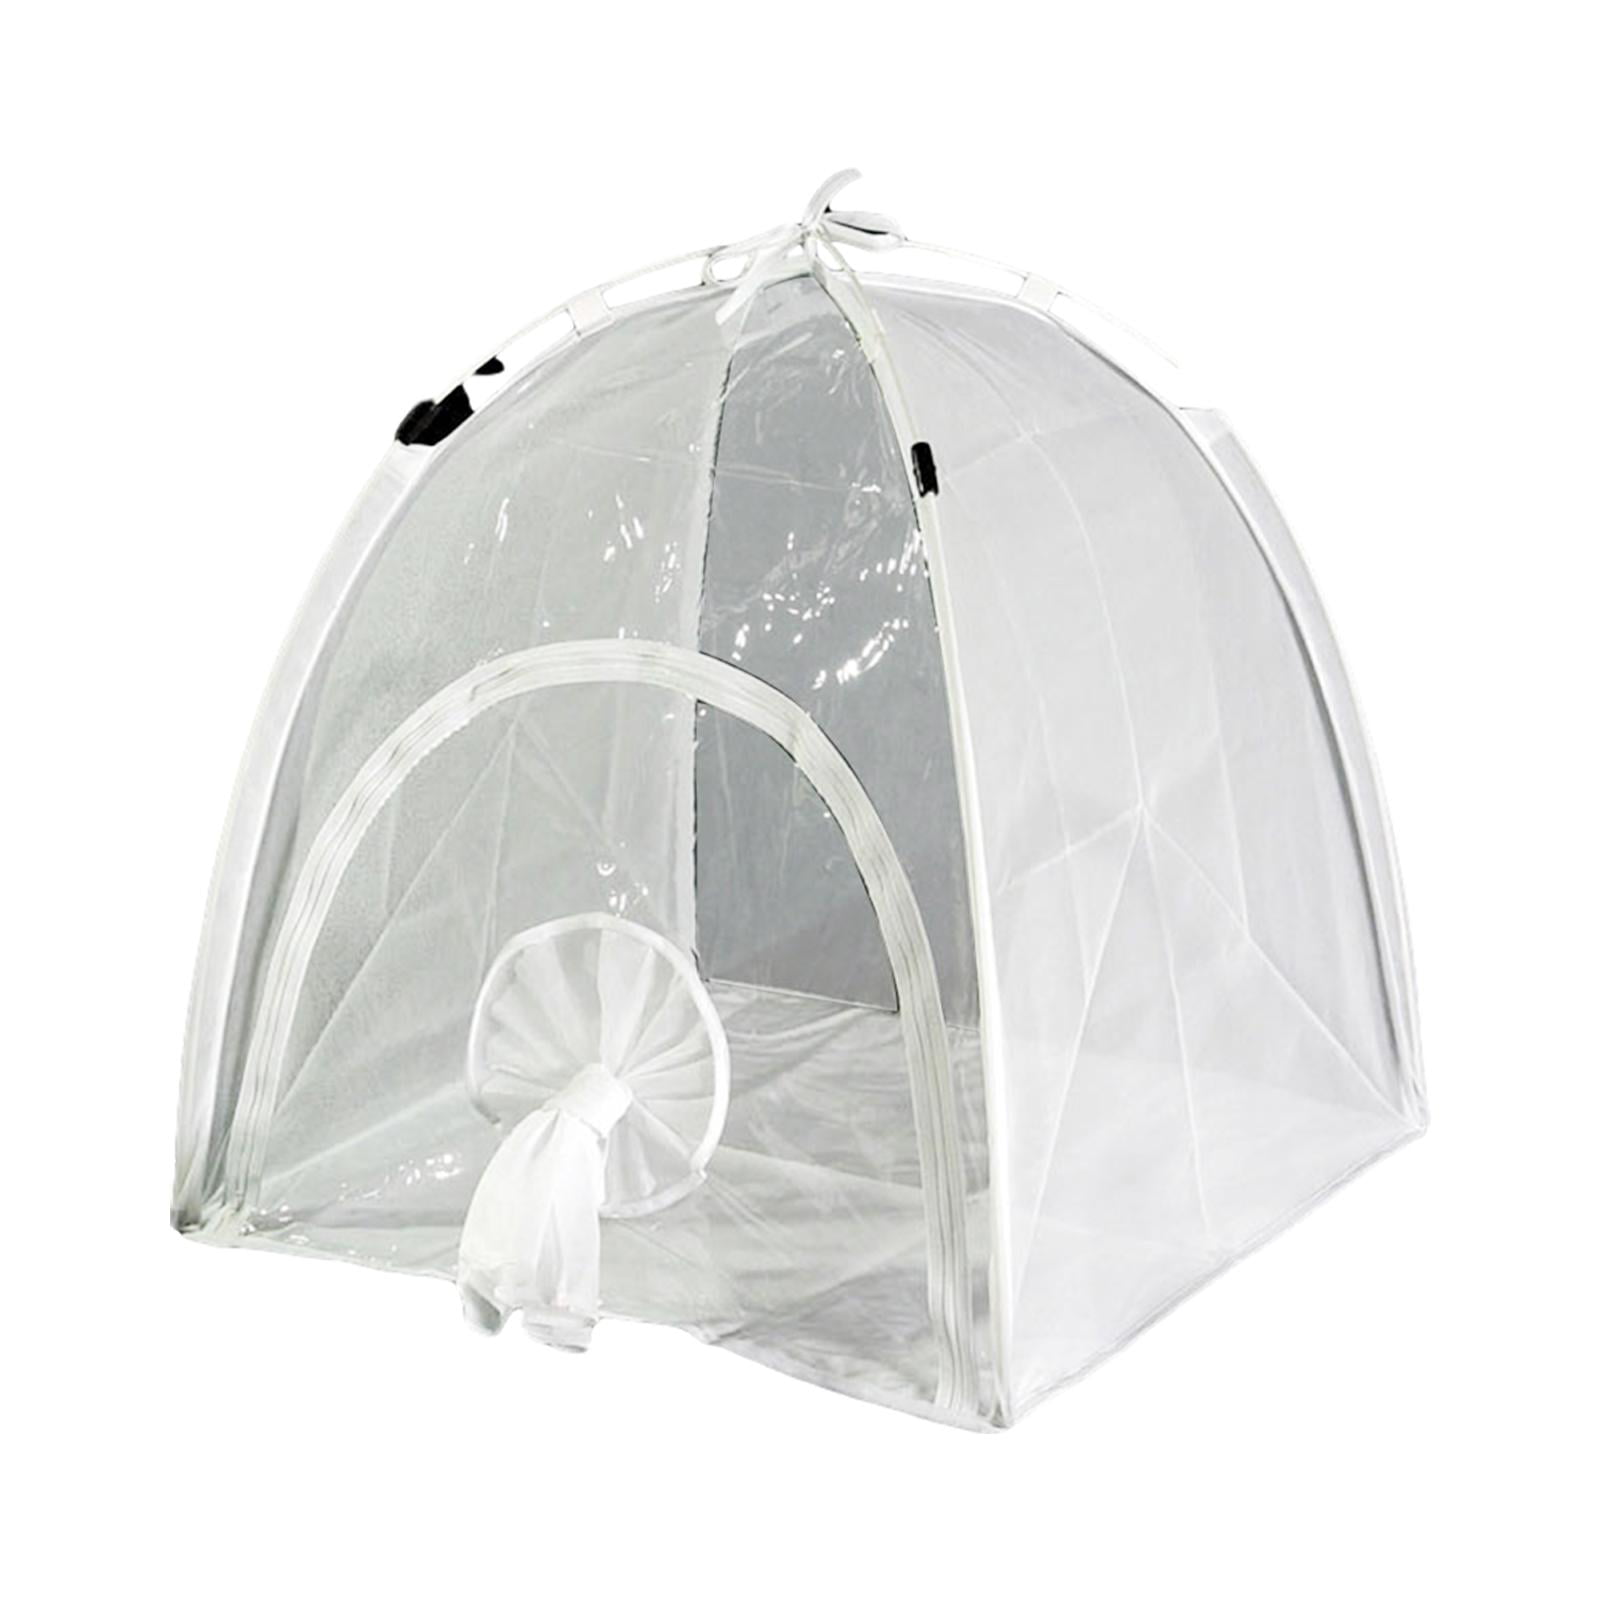 BIBIone 1 pack Plant Greenhouse Transparent Waterproof Cultivation Room Anti mosquito Box Butterfly Pet Cage grow tent,Mini Greenhouse Grow House